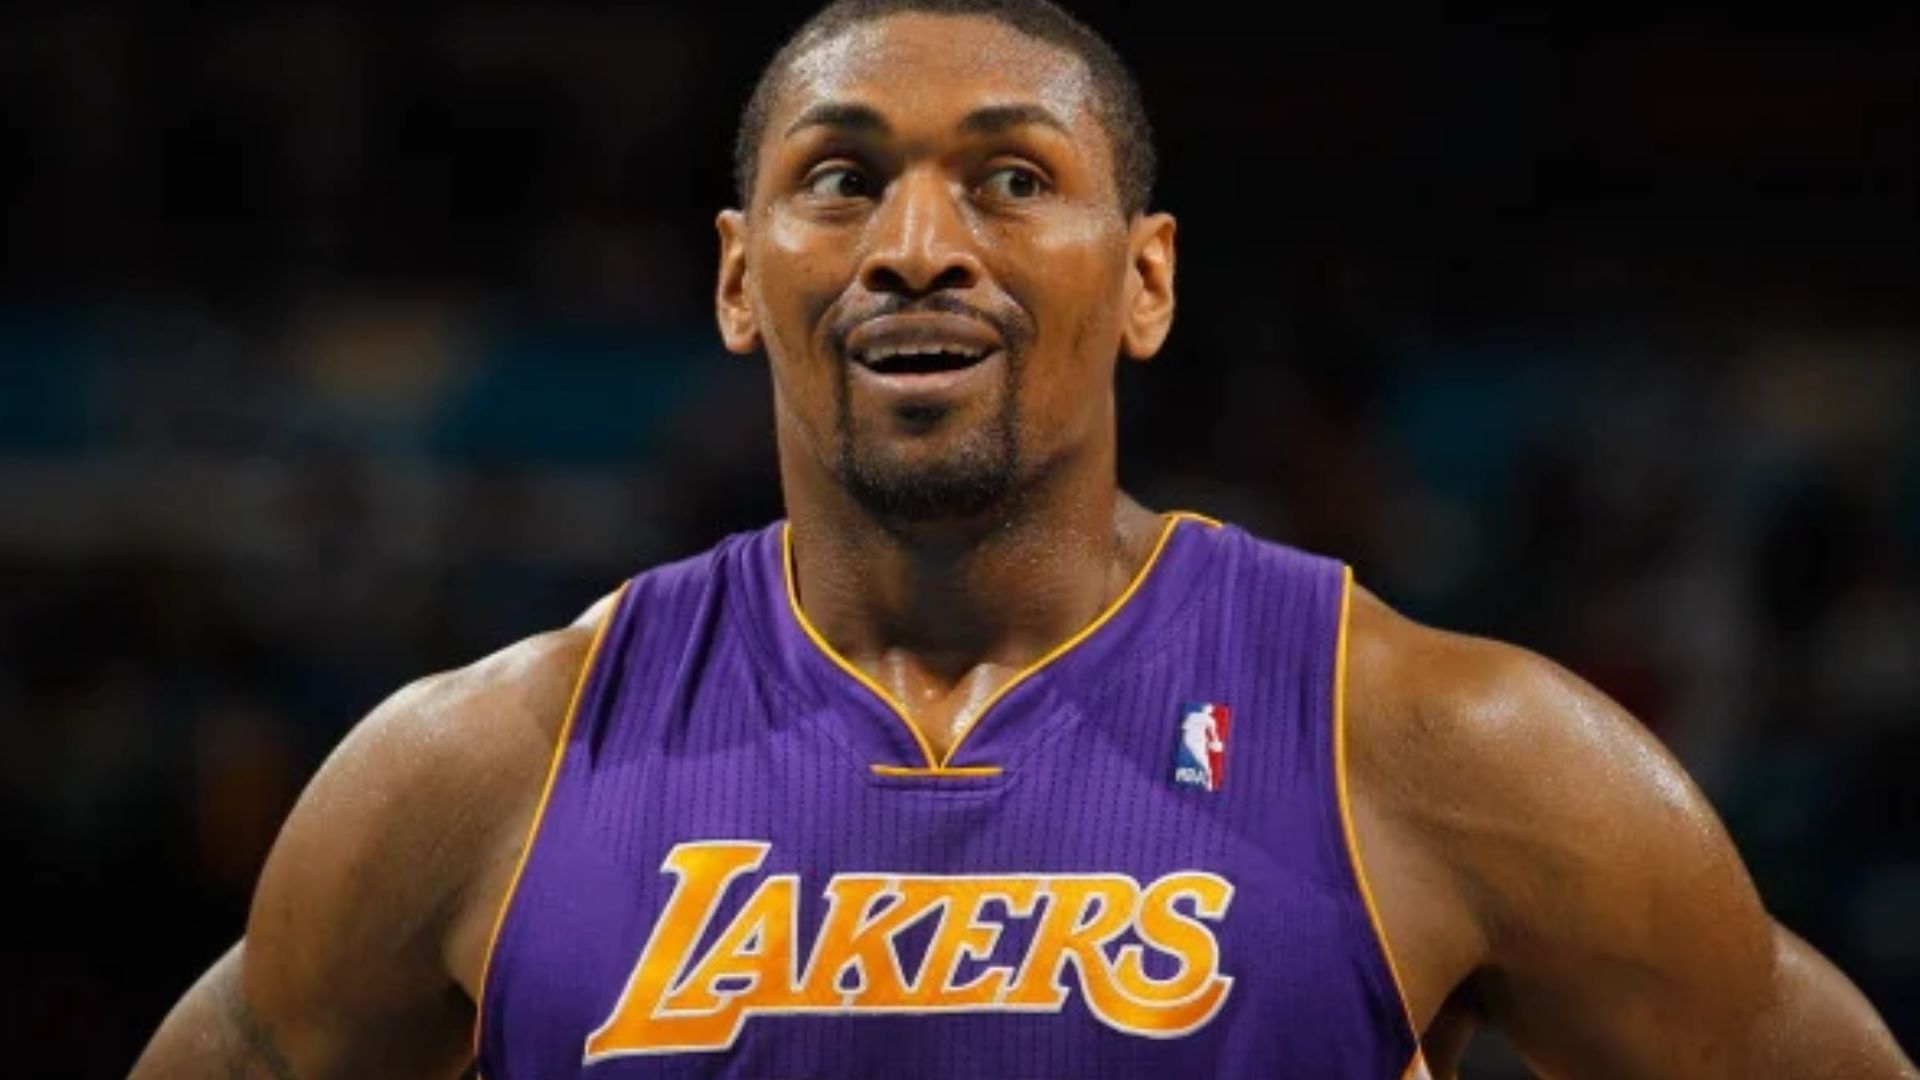 Metta World Peace Net Worth In 2023, Birthday, Age, Wife And Kids